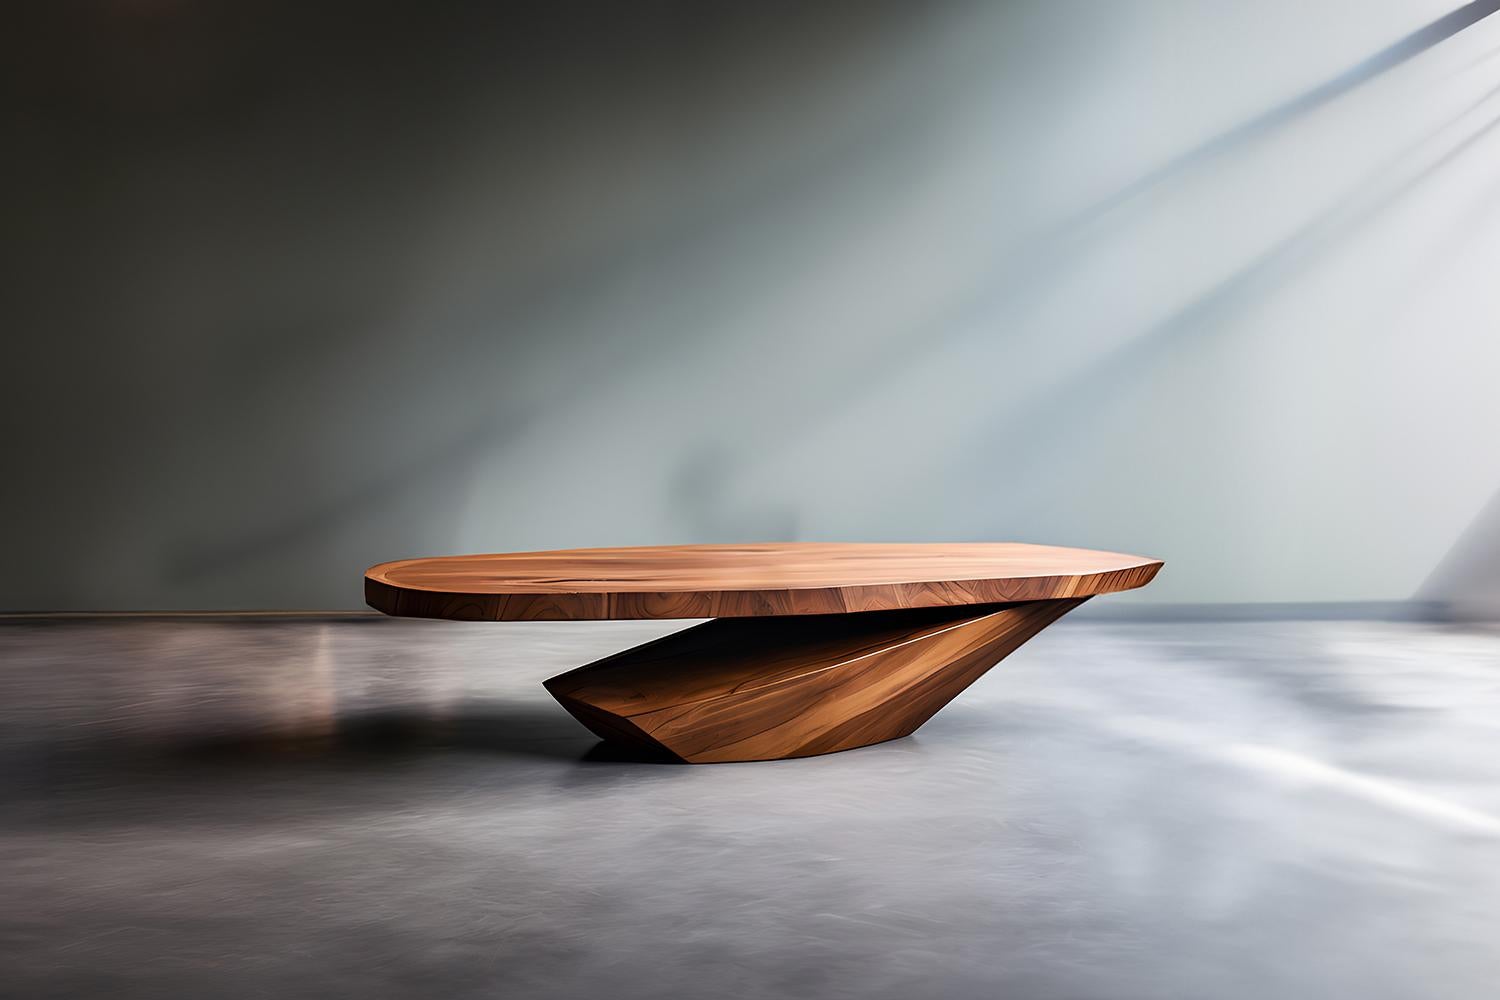 Sculptural Coffee Table Made of Solid Wood, Center Table Solace S25 by Joel Escalona


The Solace table series, designed by Joel Escalona, is a furniture collection that exudes balance and presence, thanks to its sensuous, dense, and irregular